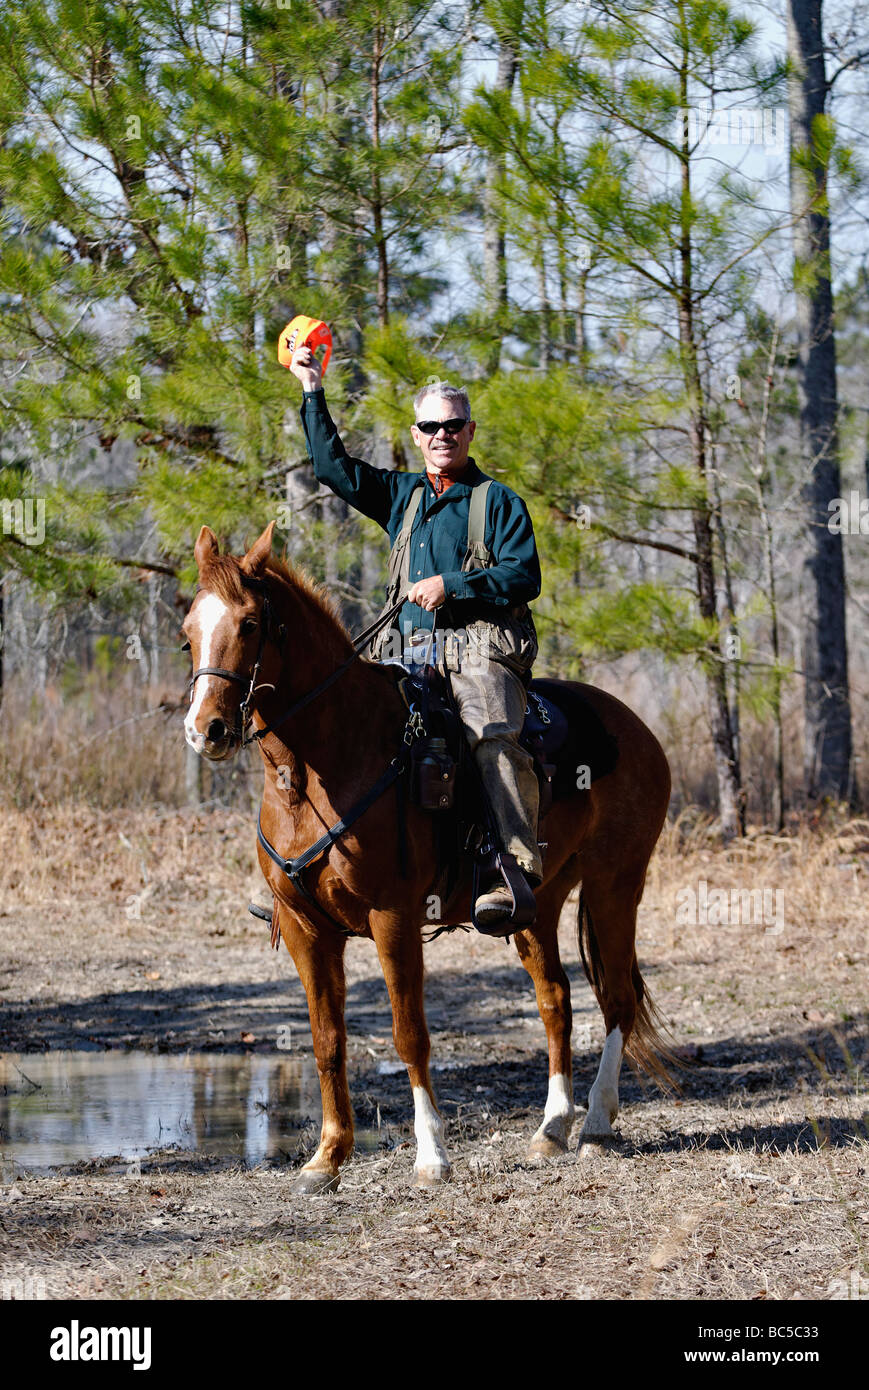 Dog Trainer George Hickox on Horseback Signalling that a Dog is on Point during Quail Hunt in the Piney Woods of Georgia Stock Photo